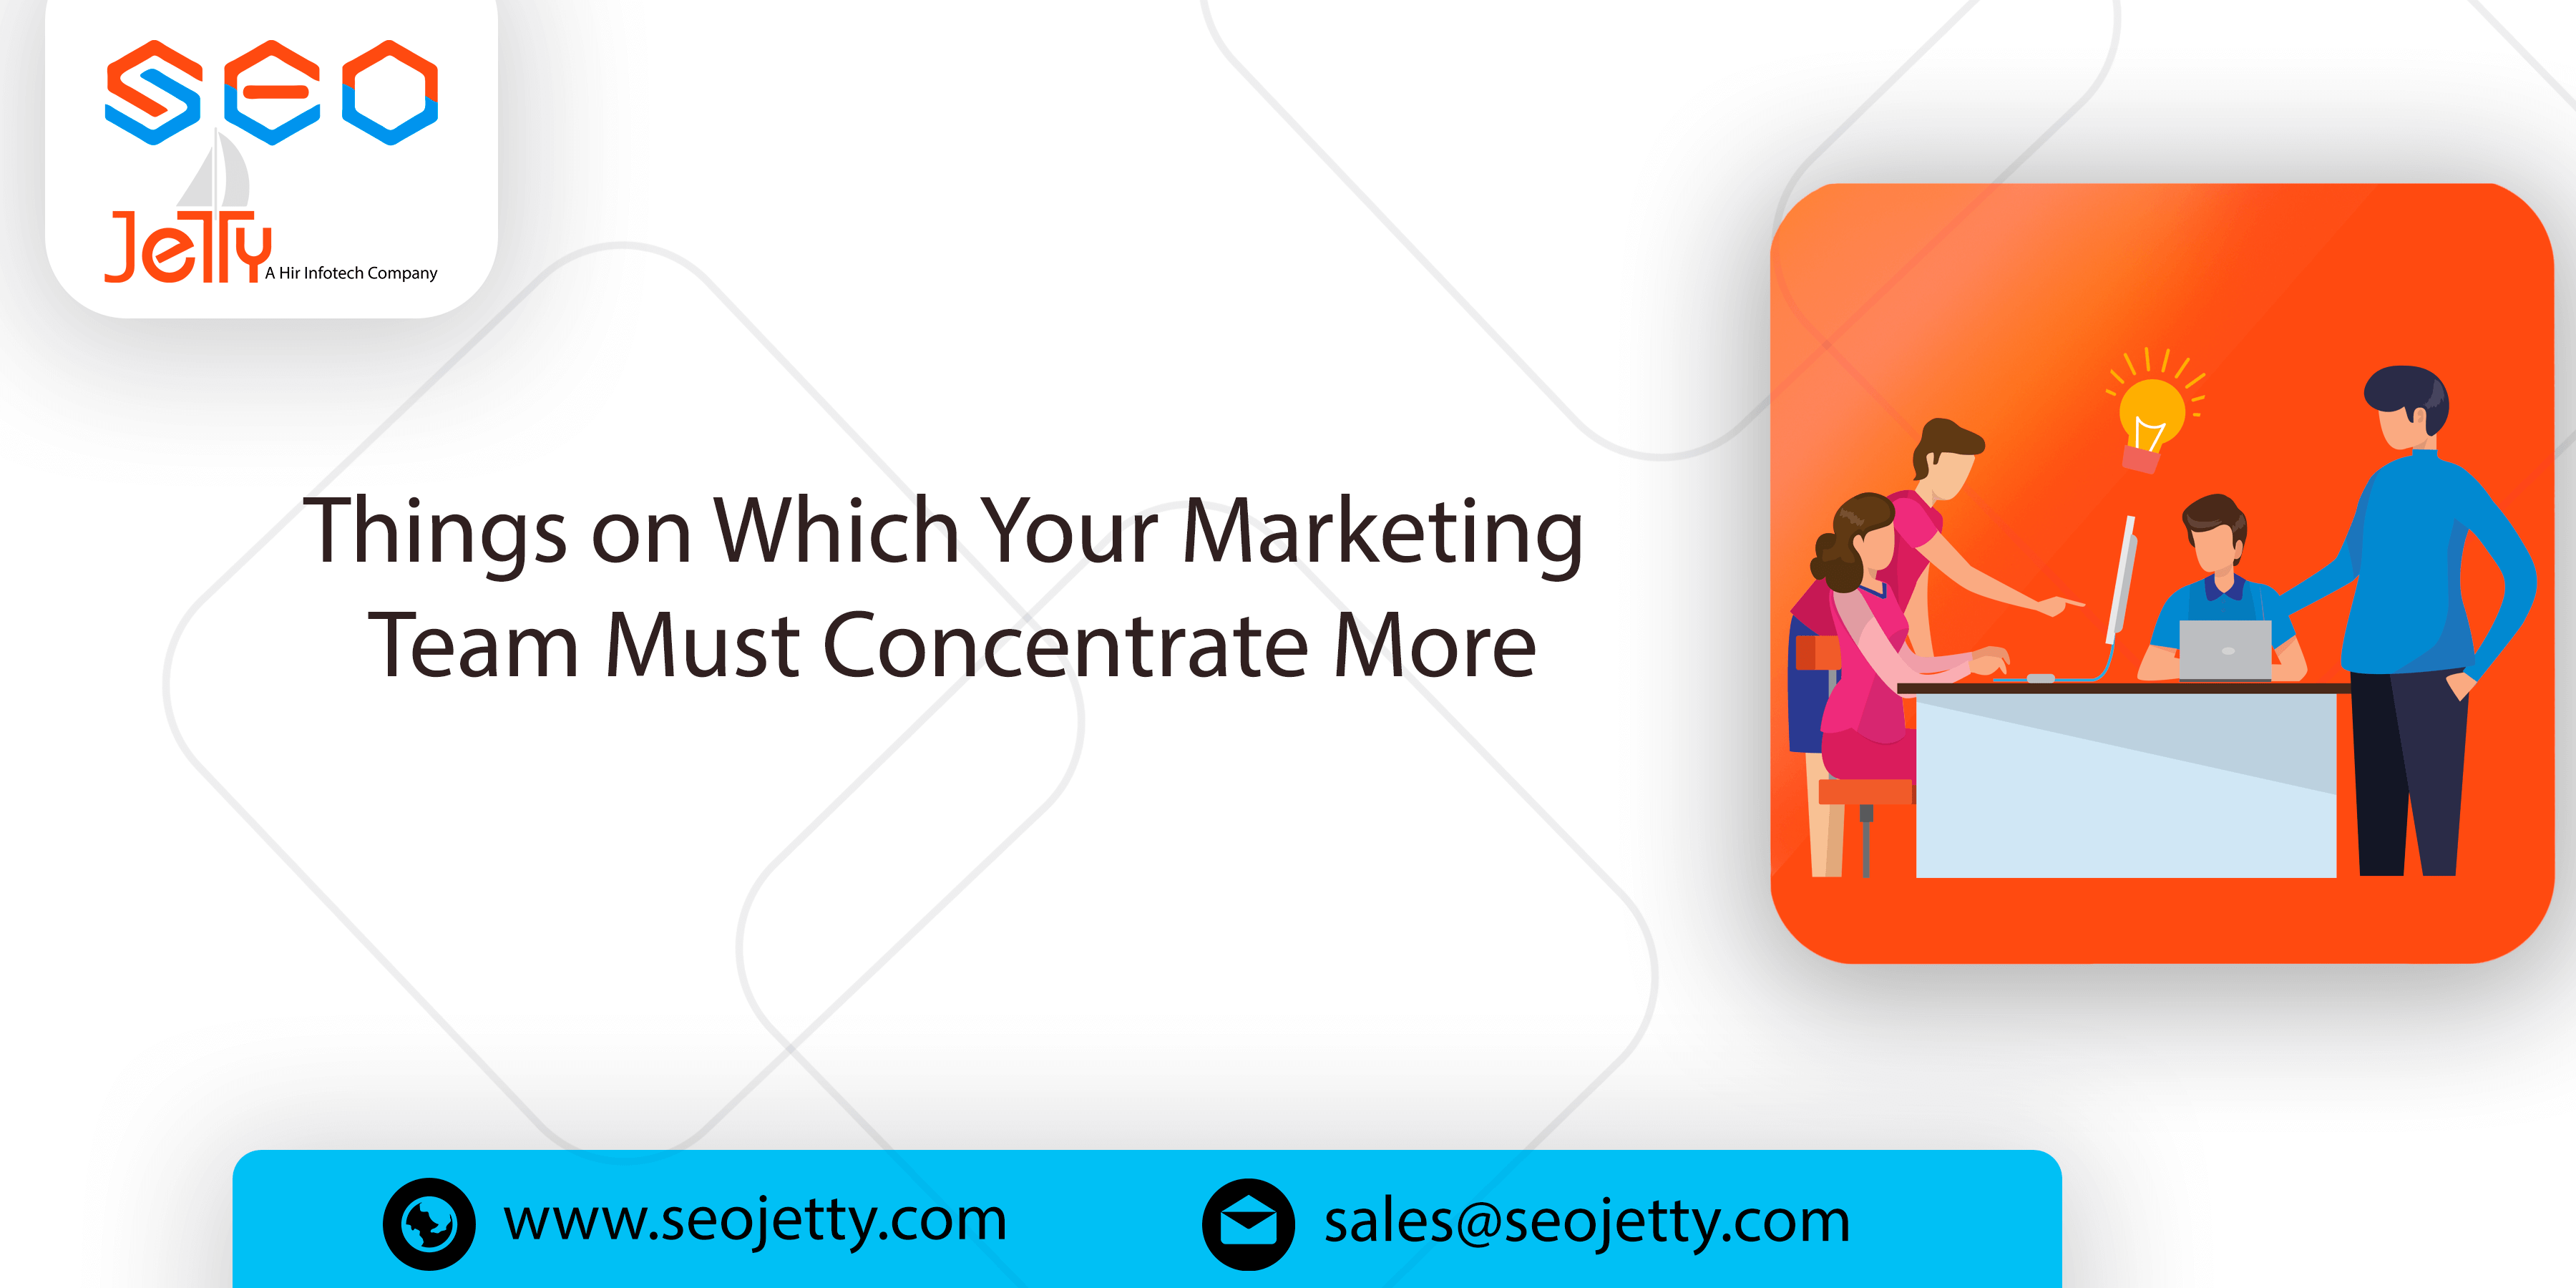 Things on Which Your Marketing Team Must Concentrate More